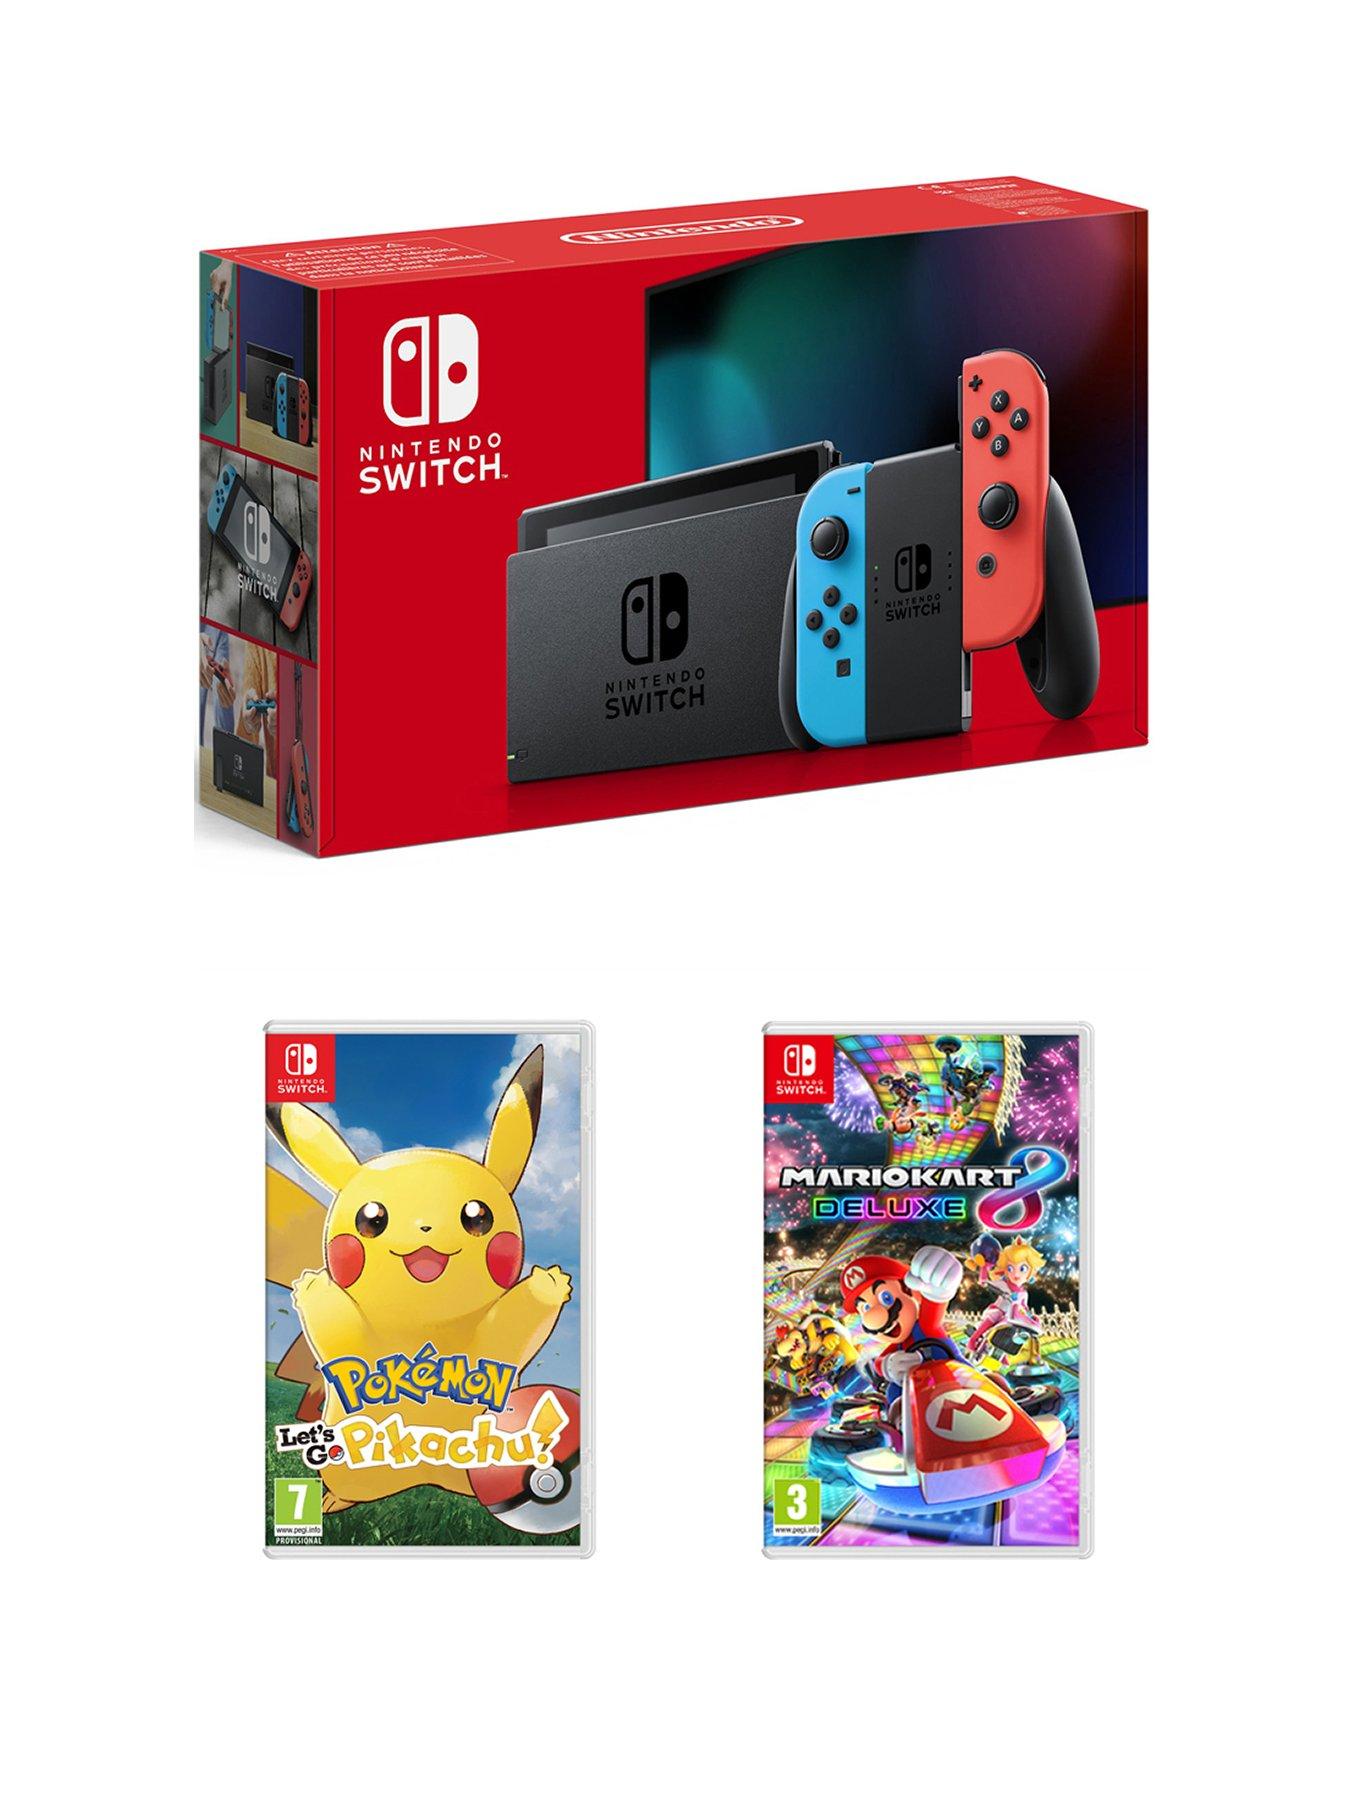 Nintendo Switch Console Improved Battery With Pokemon Lets Go Pikachu And Mario Kart 8 Deluxe - lot of 60 minecraft roblox people animals cubes action